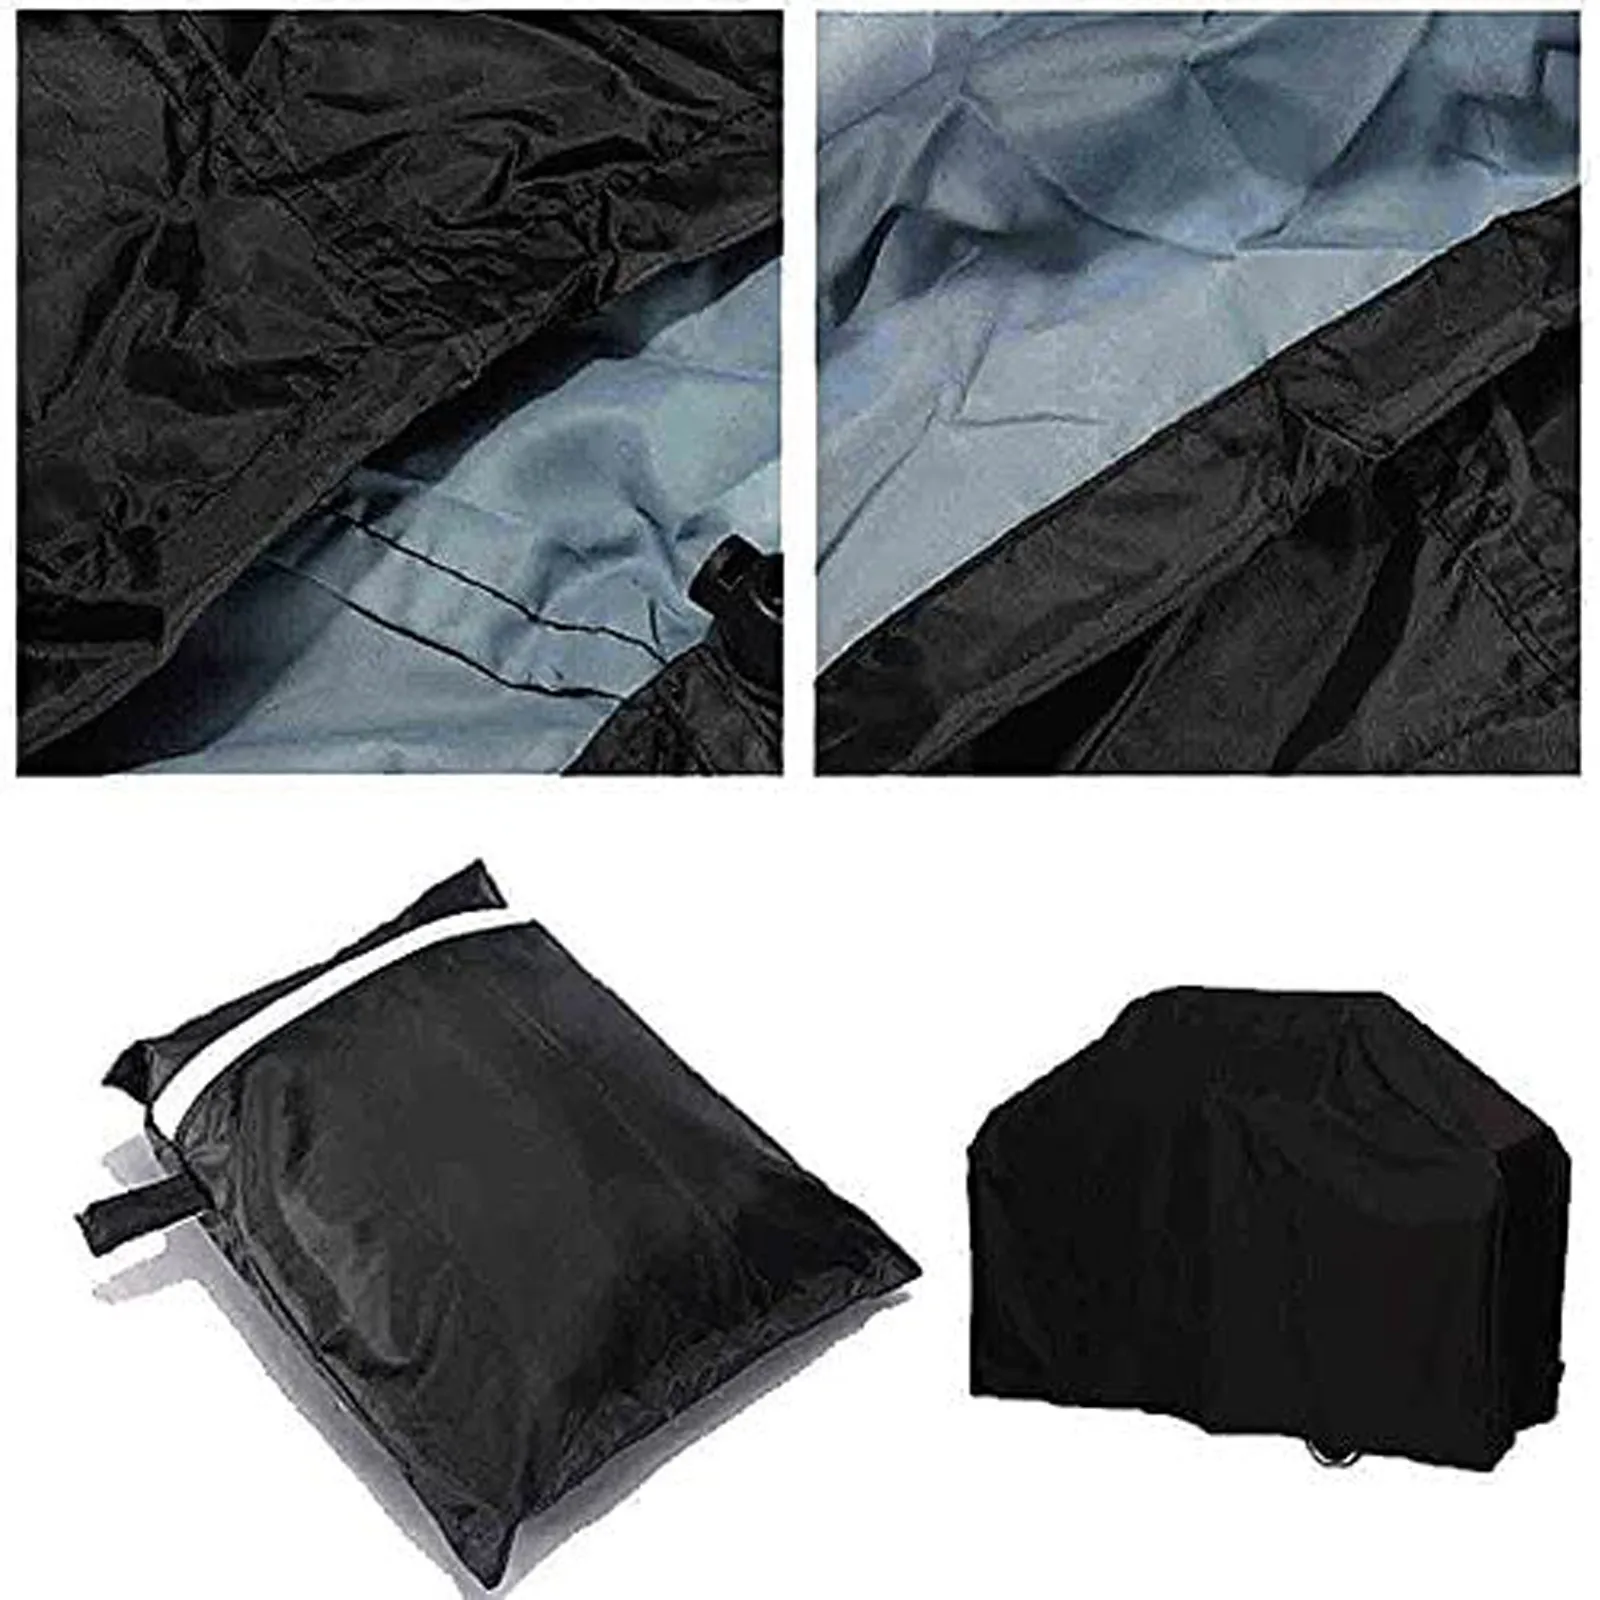 1pcs bbq grill cover black outdoor waterproof barbeque cover anti dust protector for gas charcoal electric barbecue grill free global shipping